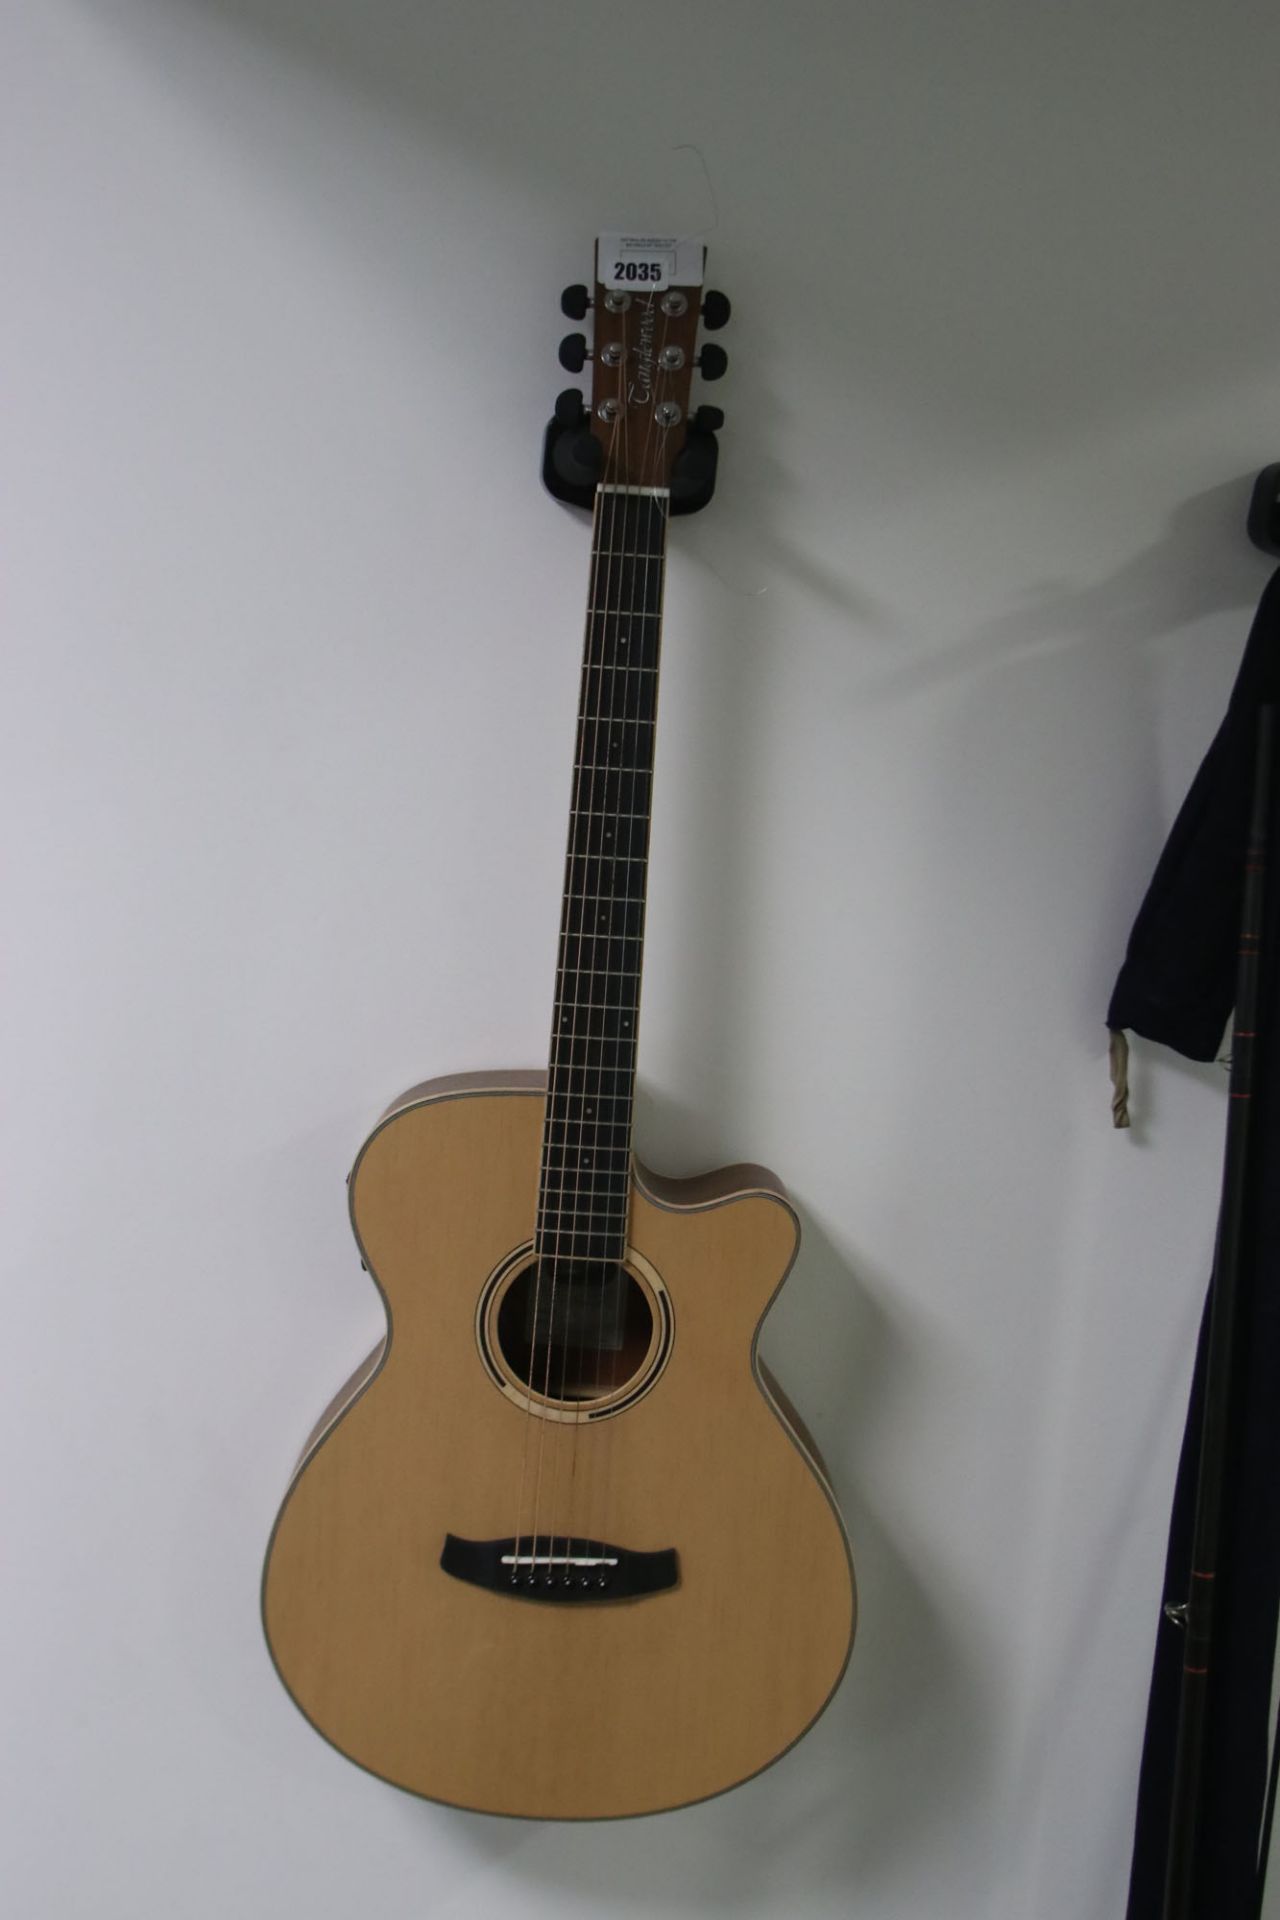 Discovery 6 string acoustic guitar